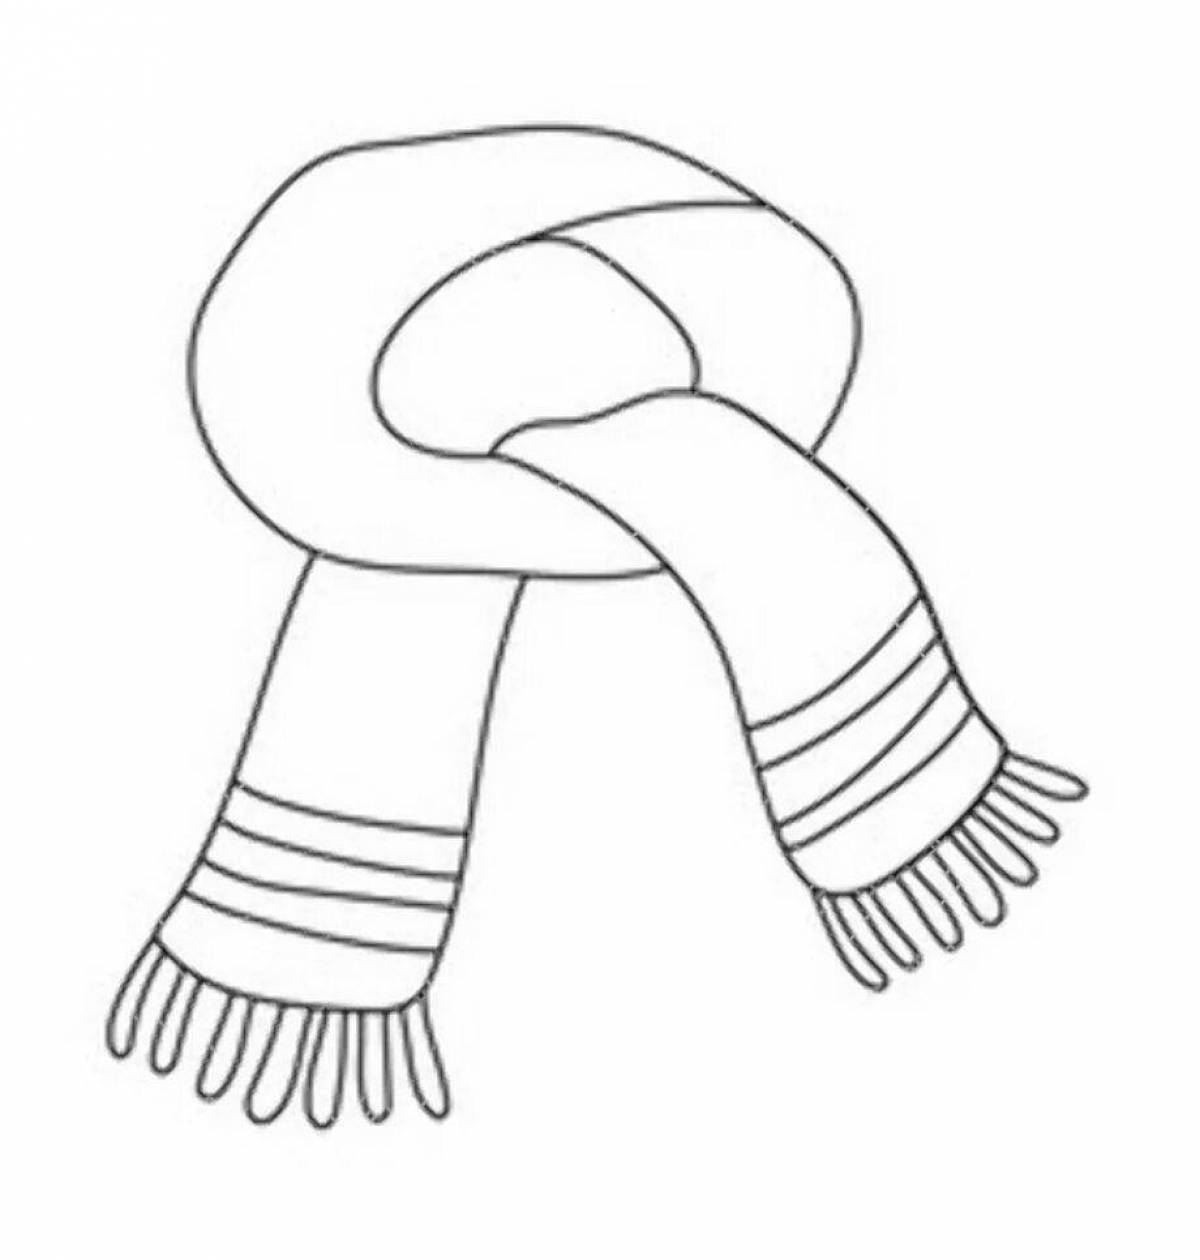 Color-frenzy scarf coloring page for kids